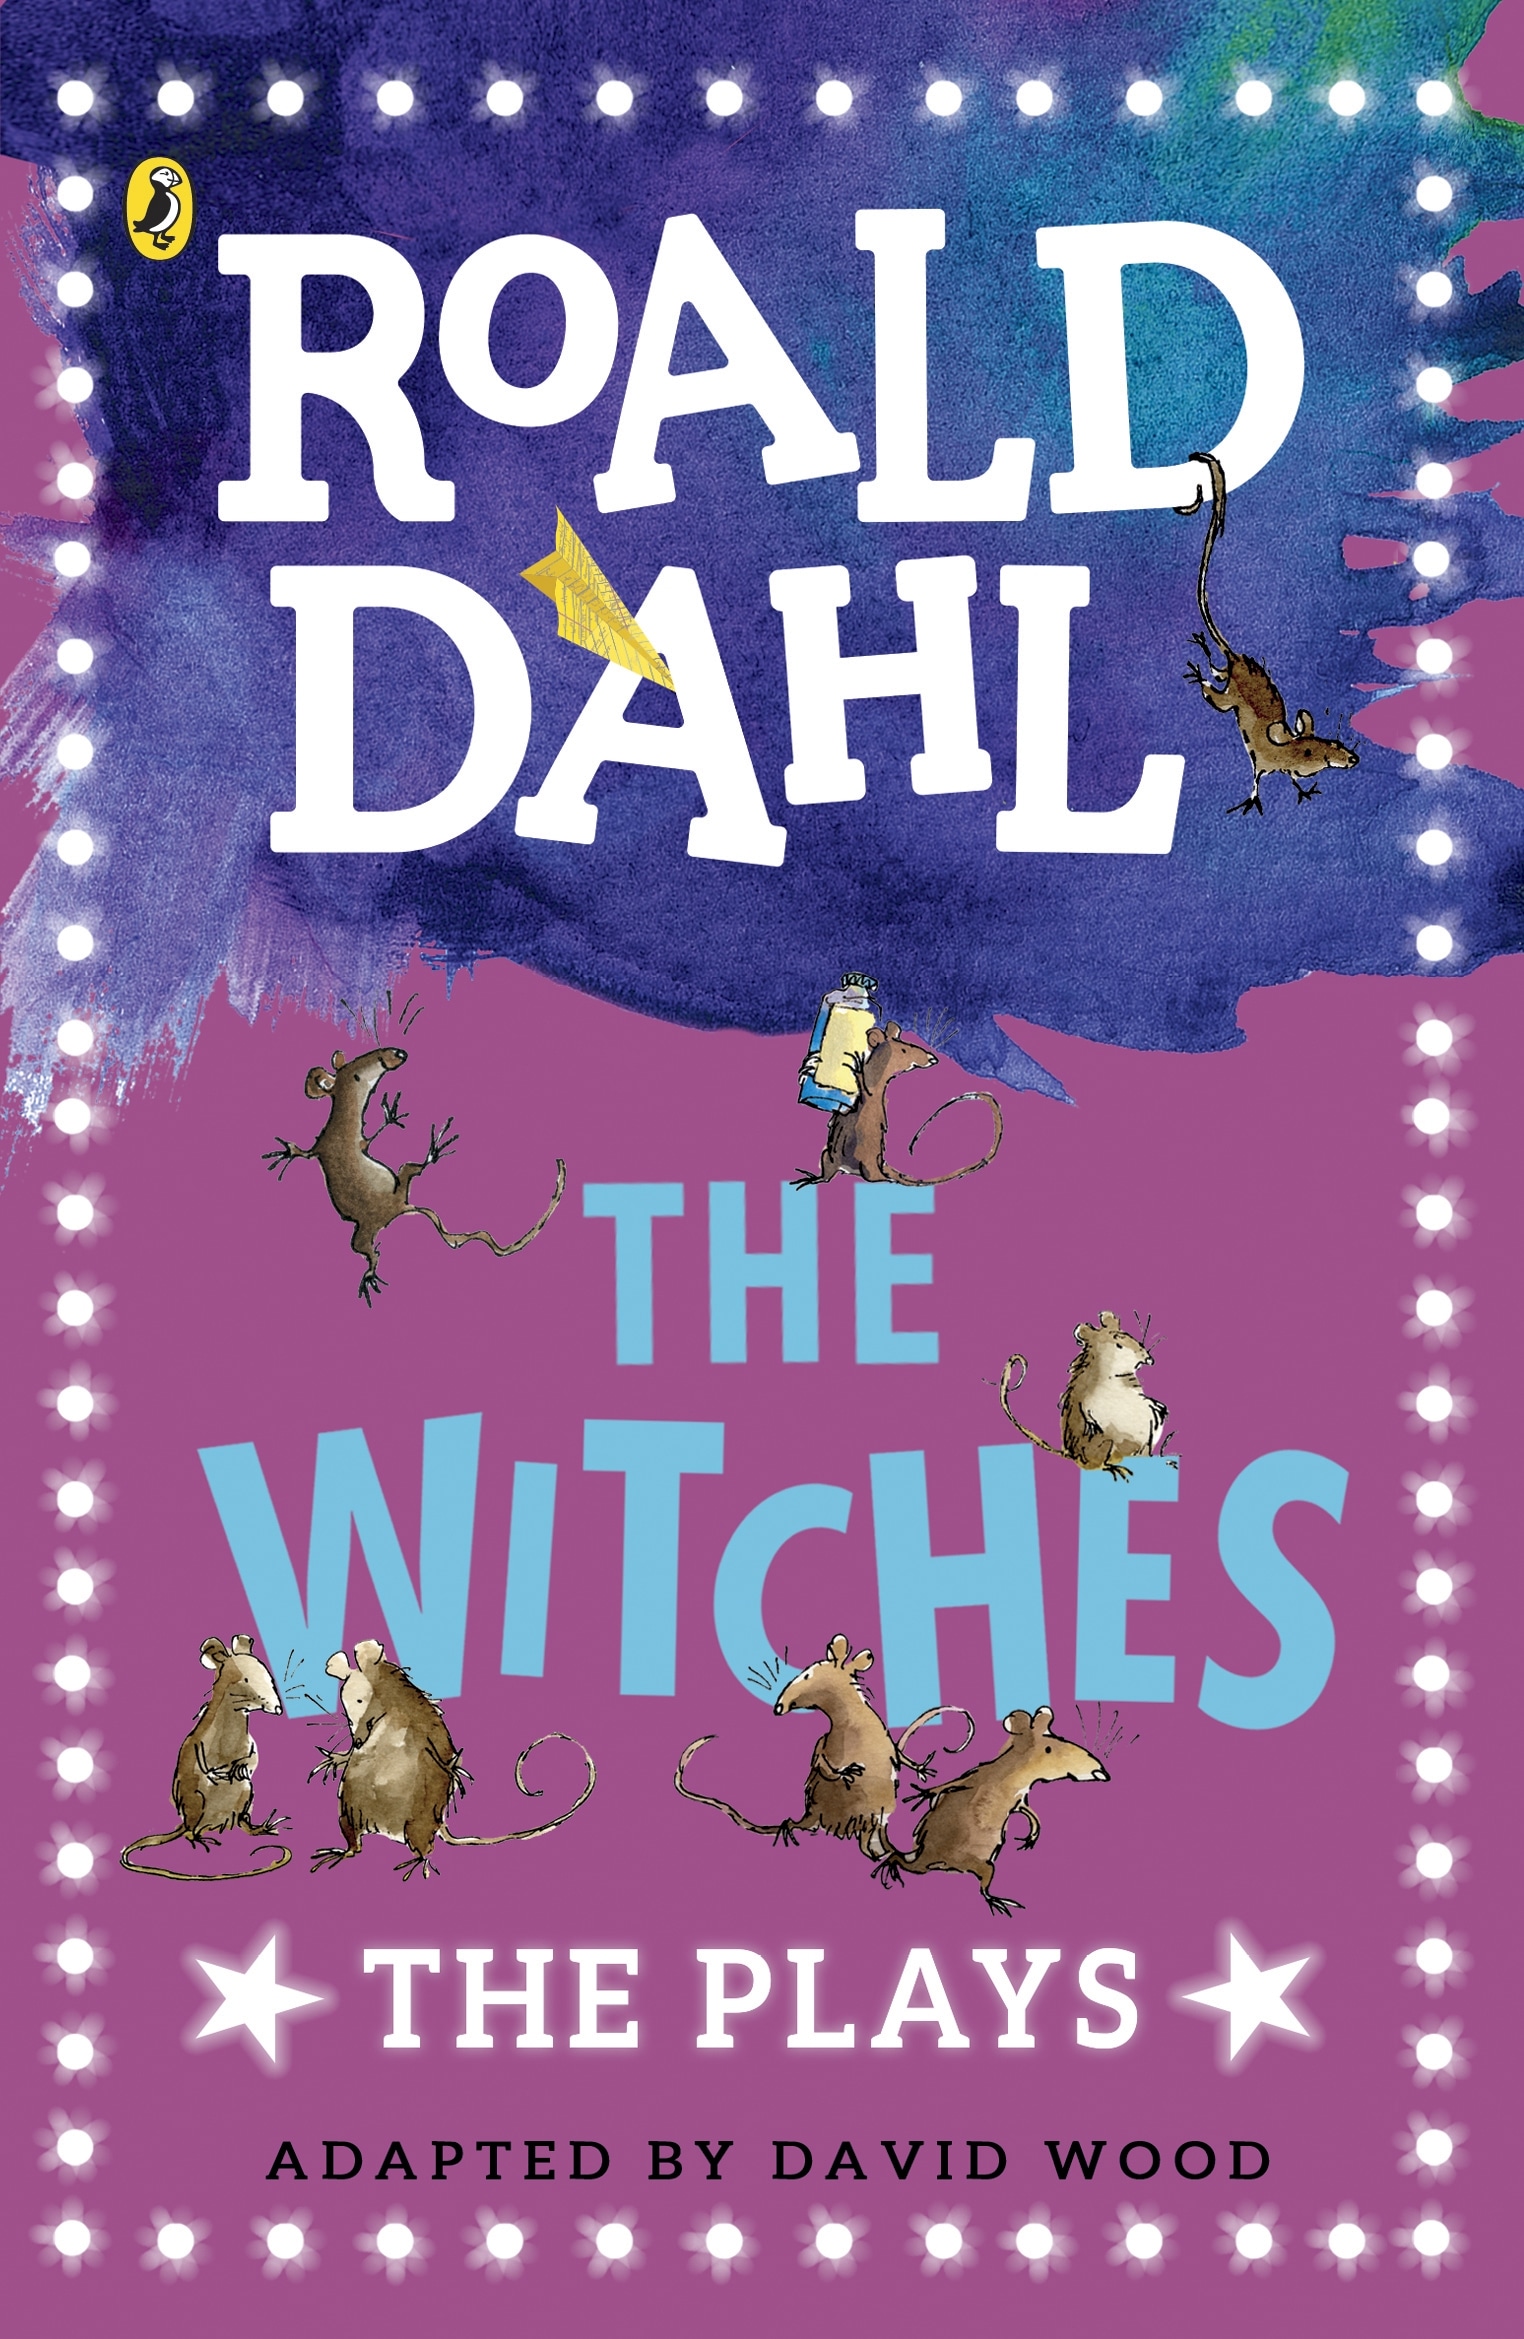 Book “The Witches” by Roald Dahl — August 3, 2017